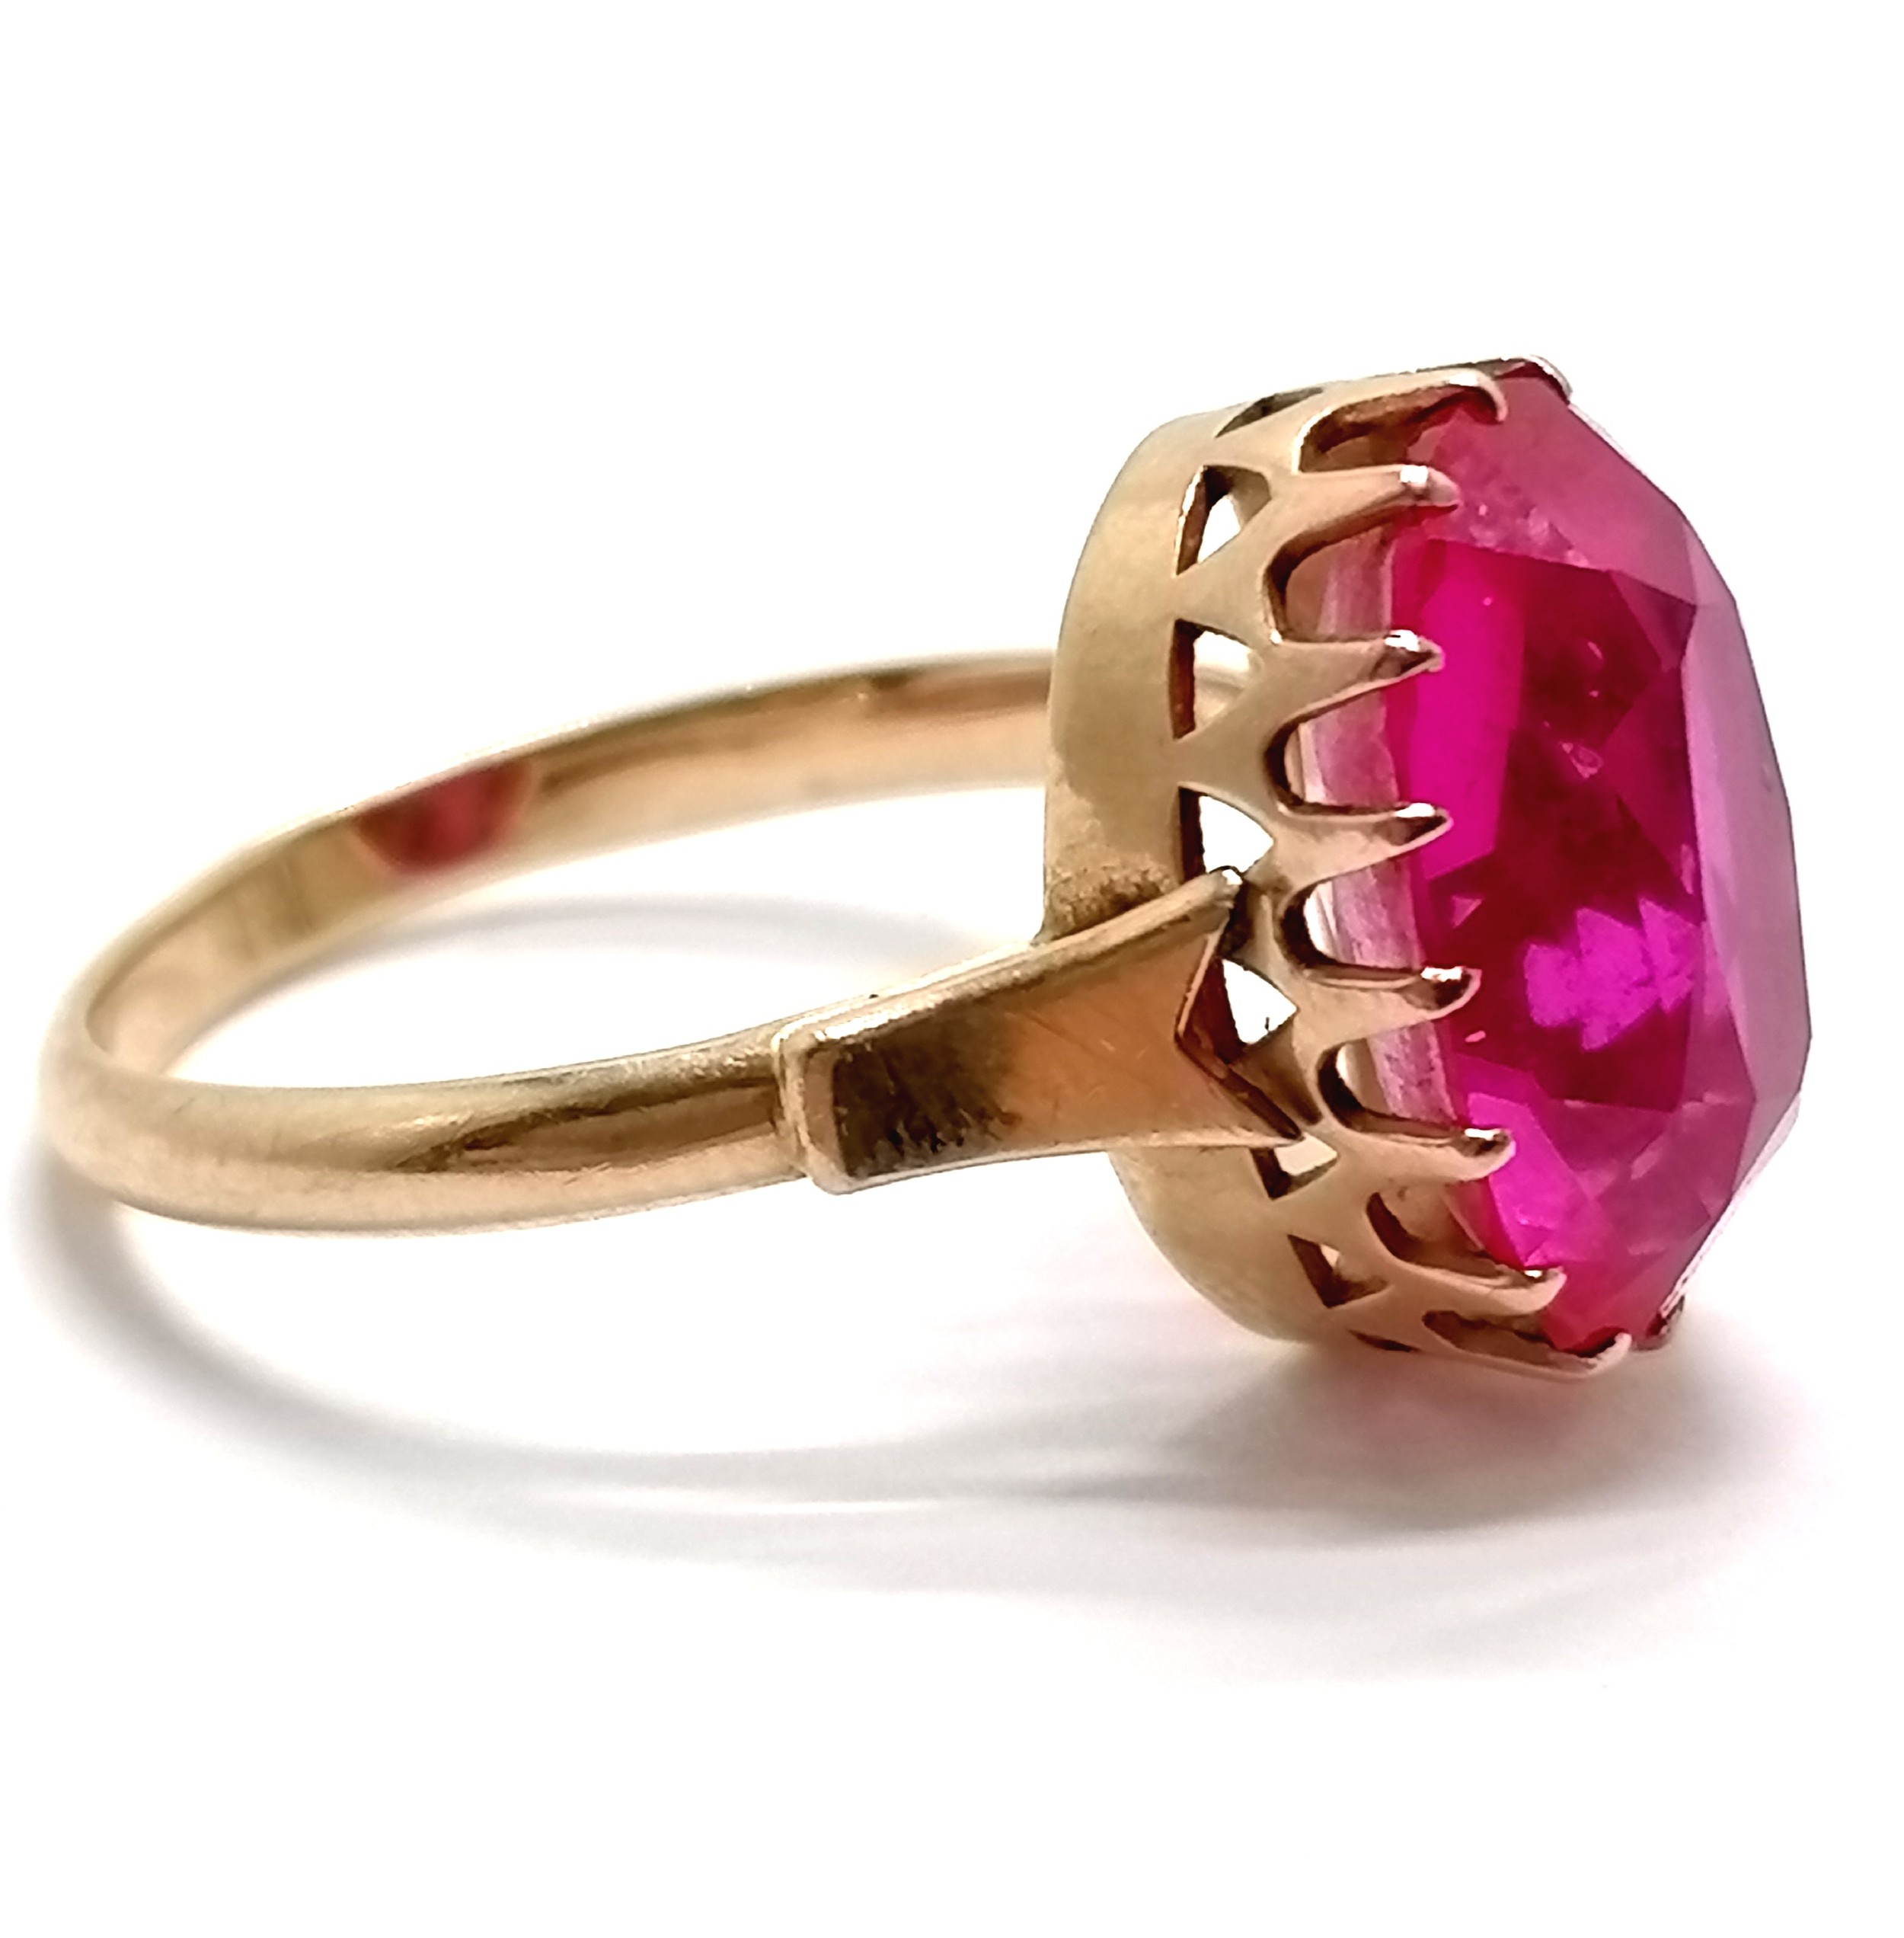 Russian 583 hallmarked gold pink sapphire (tests as) ring - size Q & 4.2g total weight - SOLD ON - Image 4 of 4